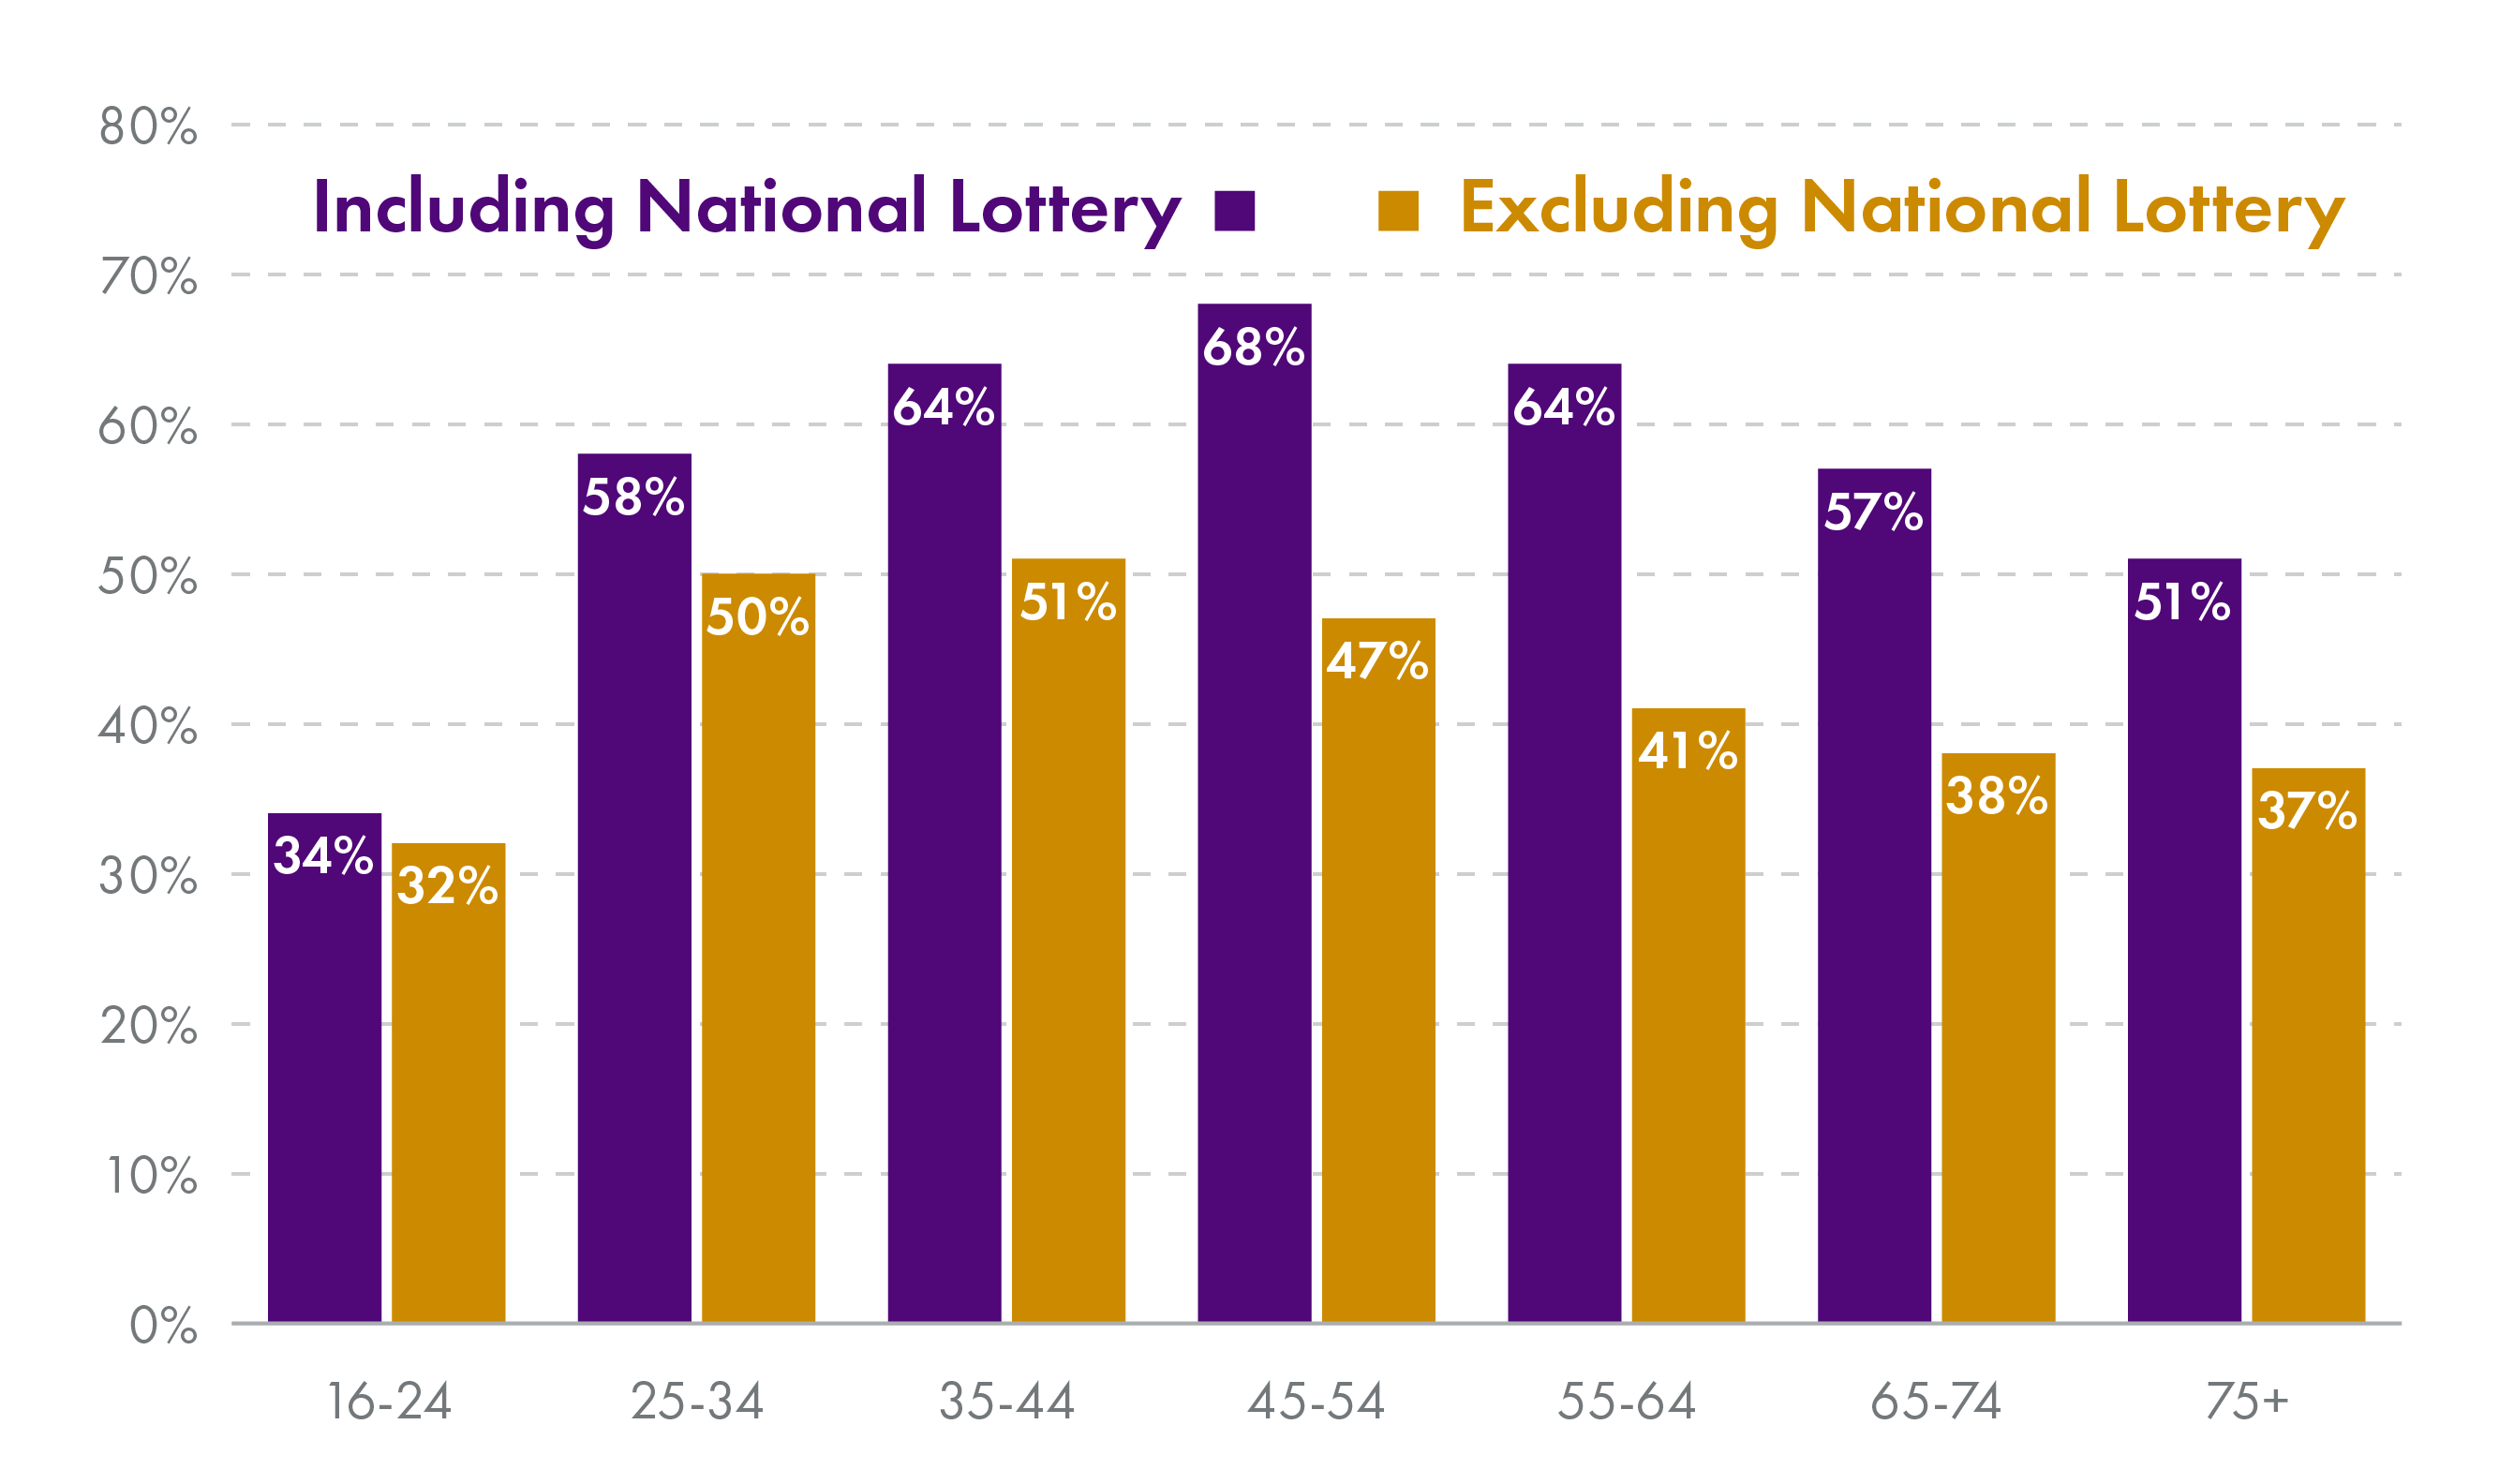 A bar chart showing gambling participation by age. Gambling participation is highest in those aged 45-54 and lowest in those aged 16-24. When the national lottery is excluded, participation is highest in those aged 35-44 and lowest in those aged 16-24.